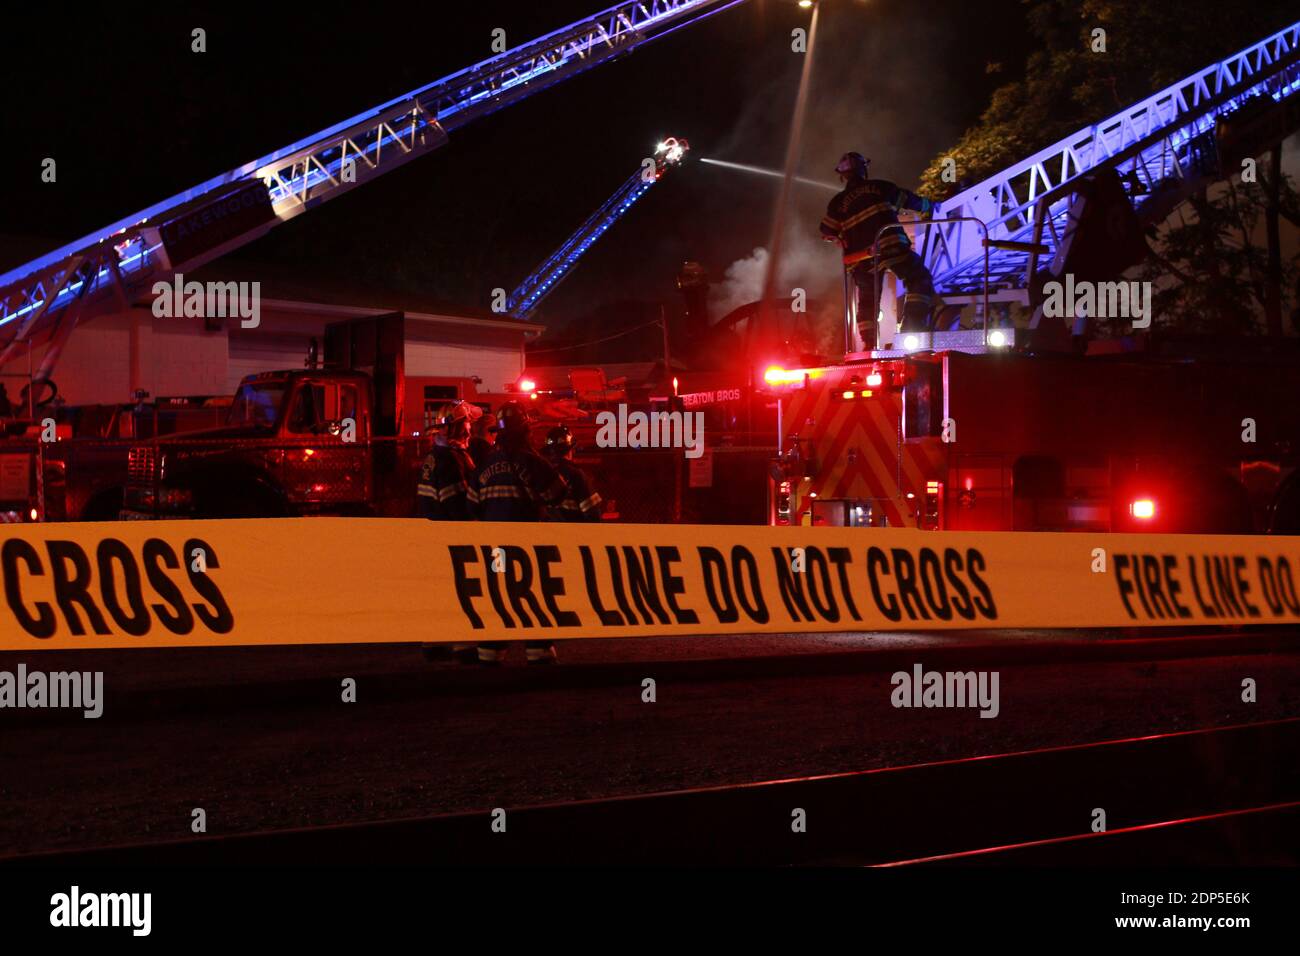 Police and fireline tape to keep people out of a scene or danger. Stock Photo